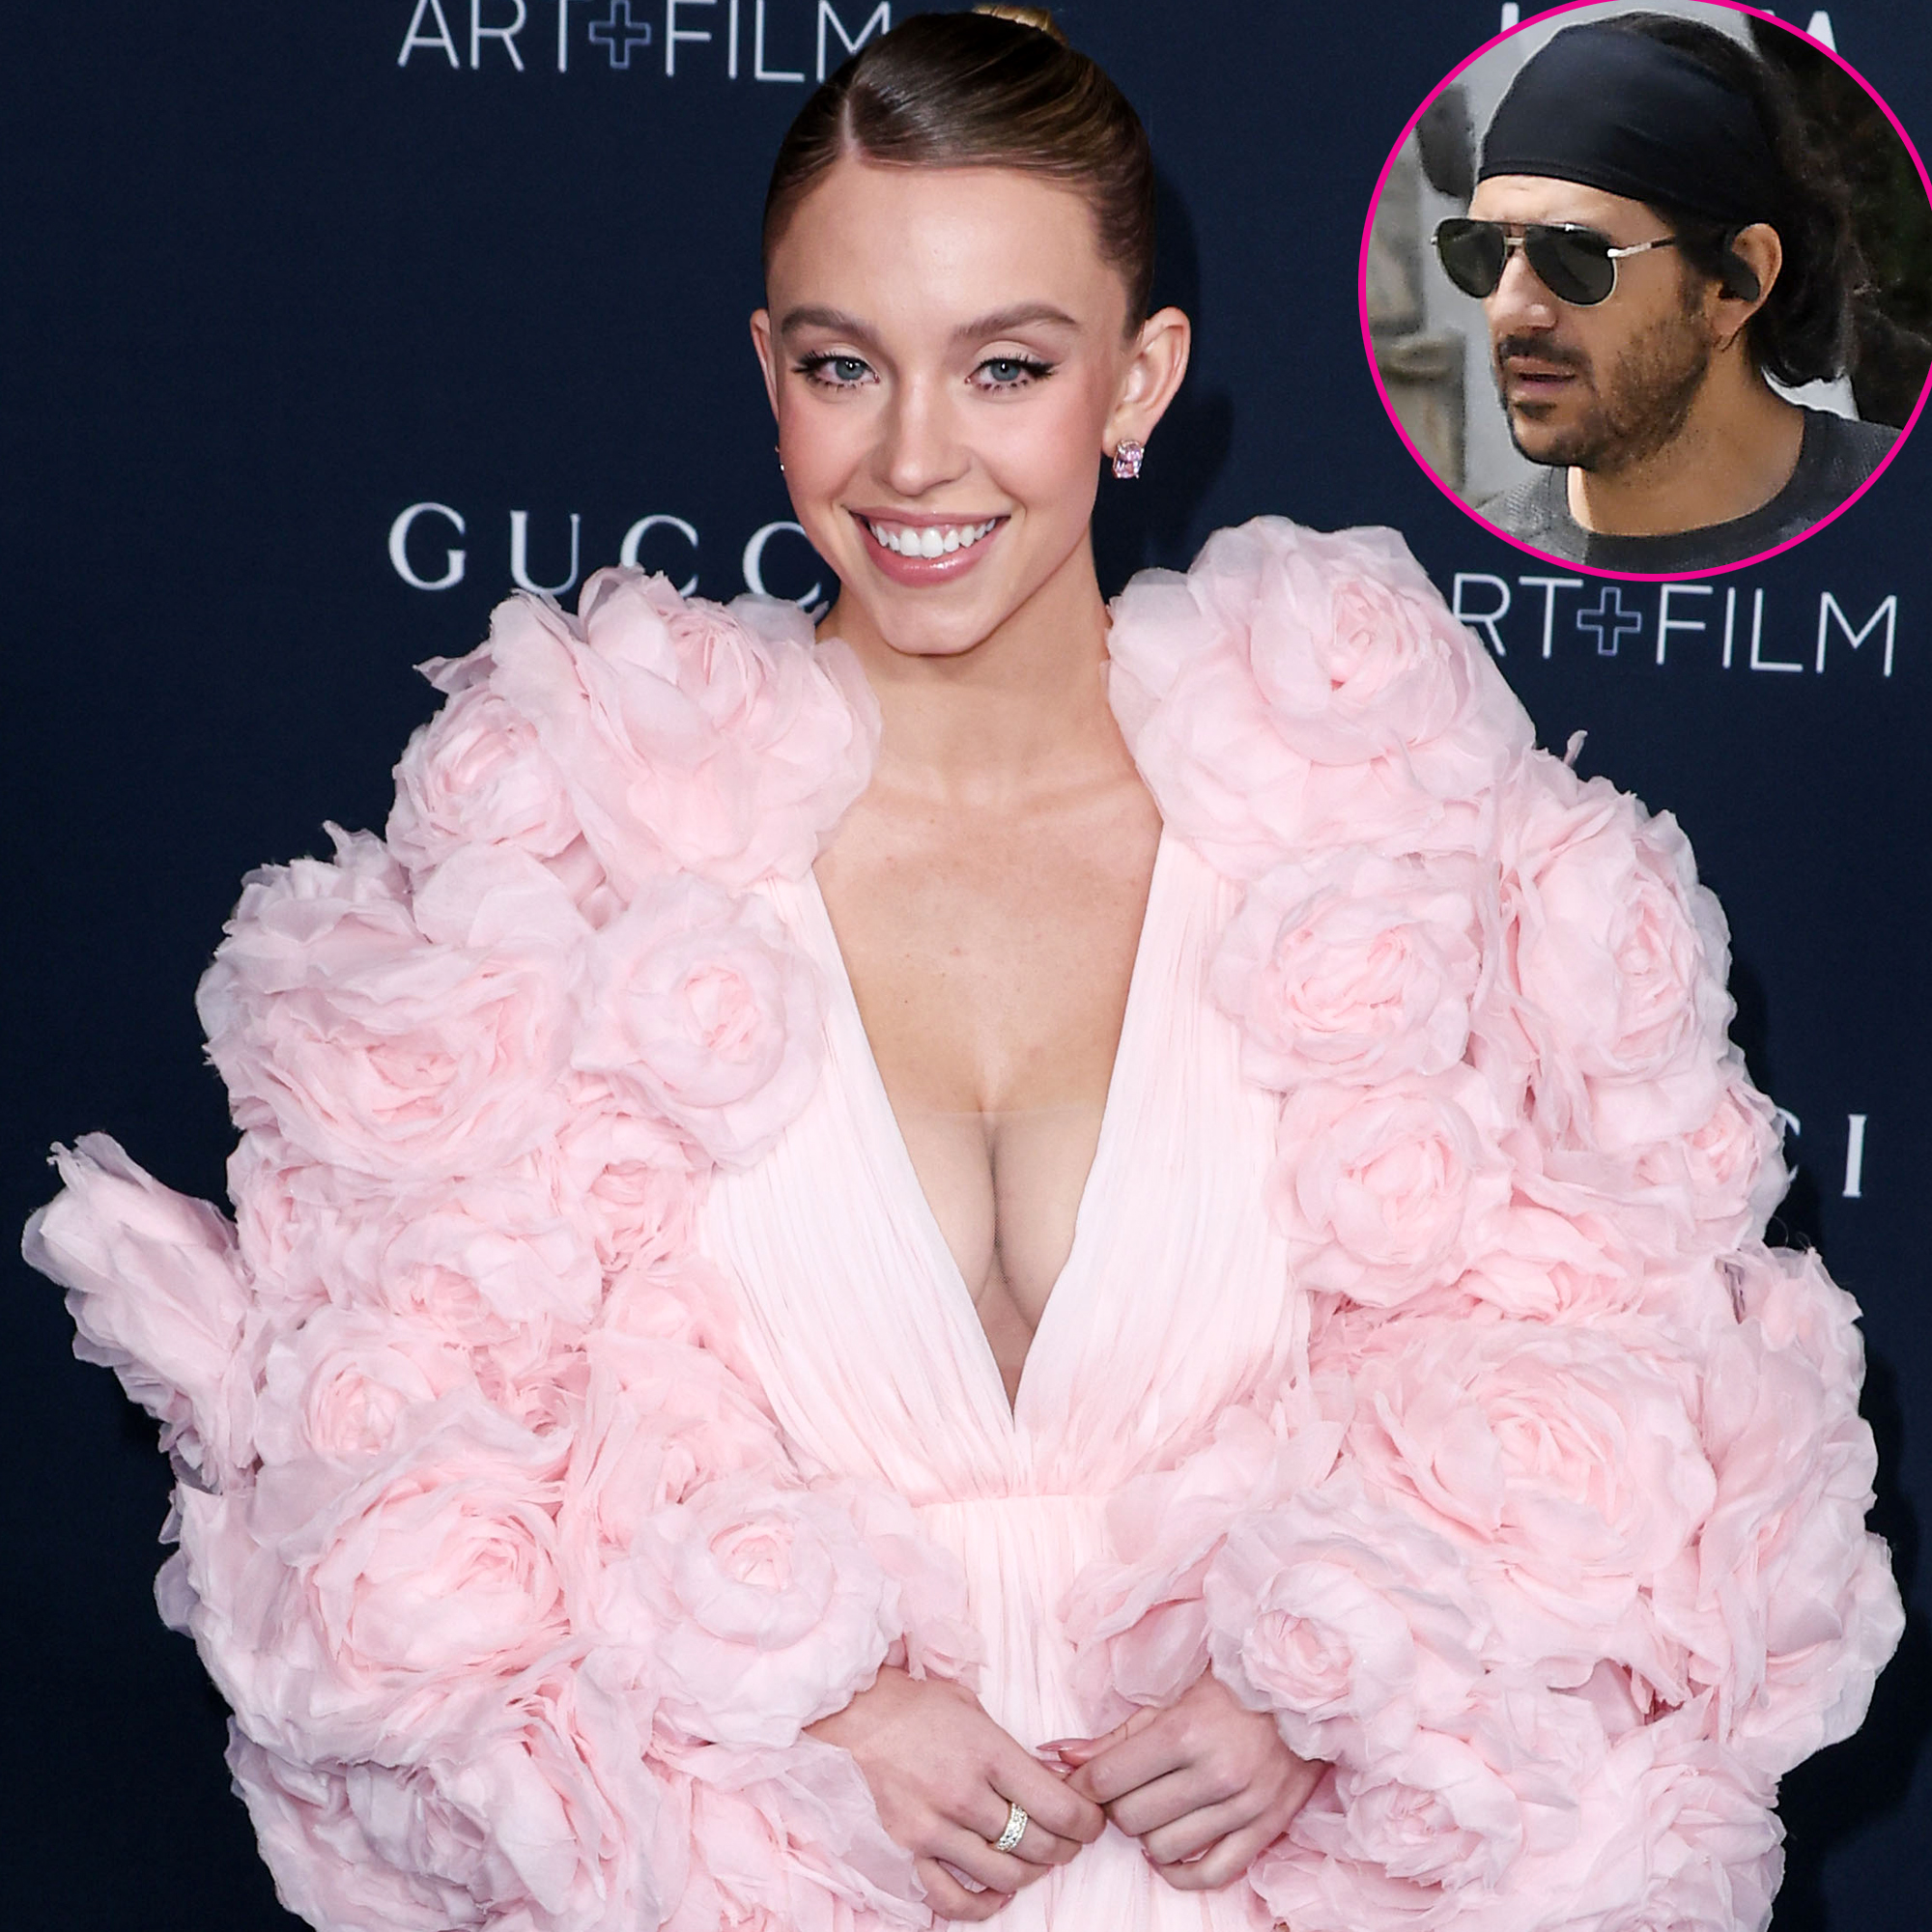 Date Night! Sydney Sweeney Steps Out With BF Jonathan Davino